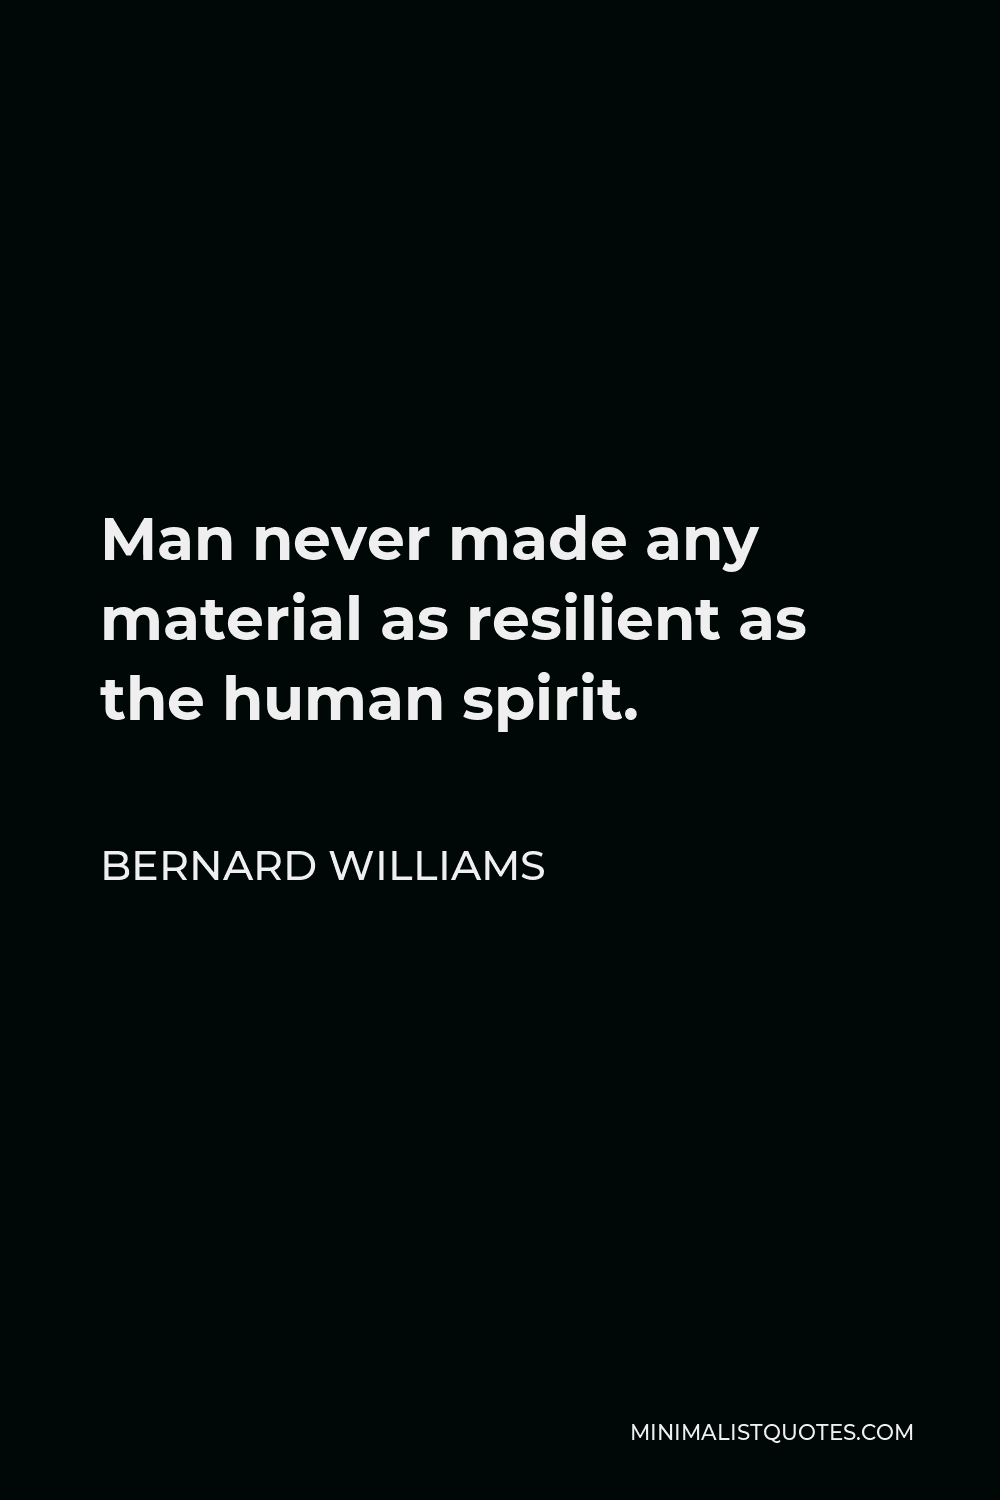 Bernard Williams Quote - Man never made any material as resilient as the human spirit.